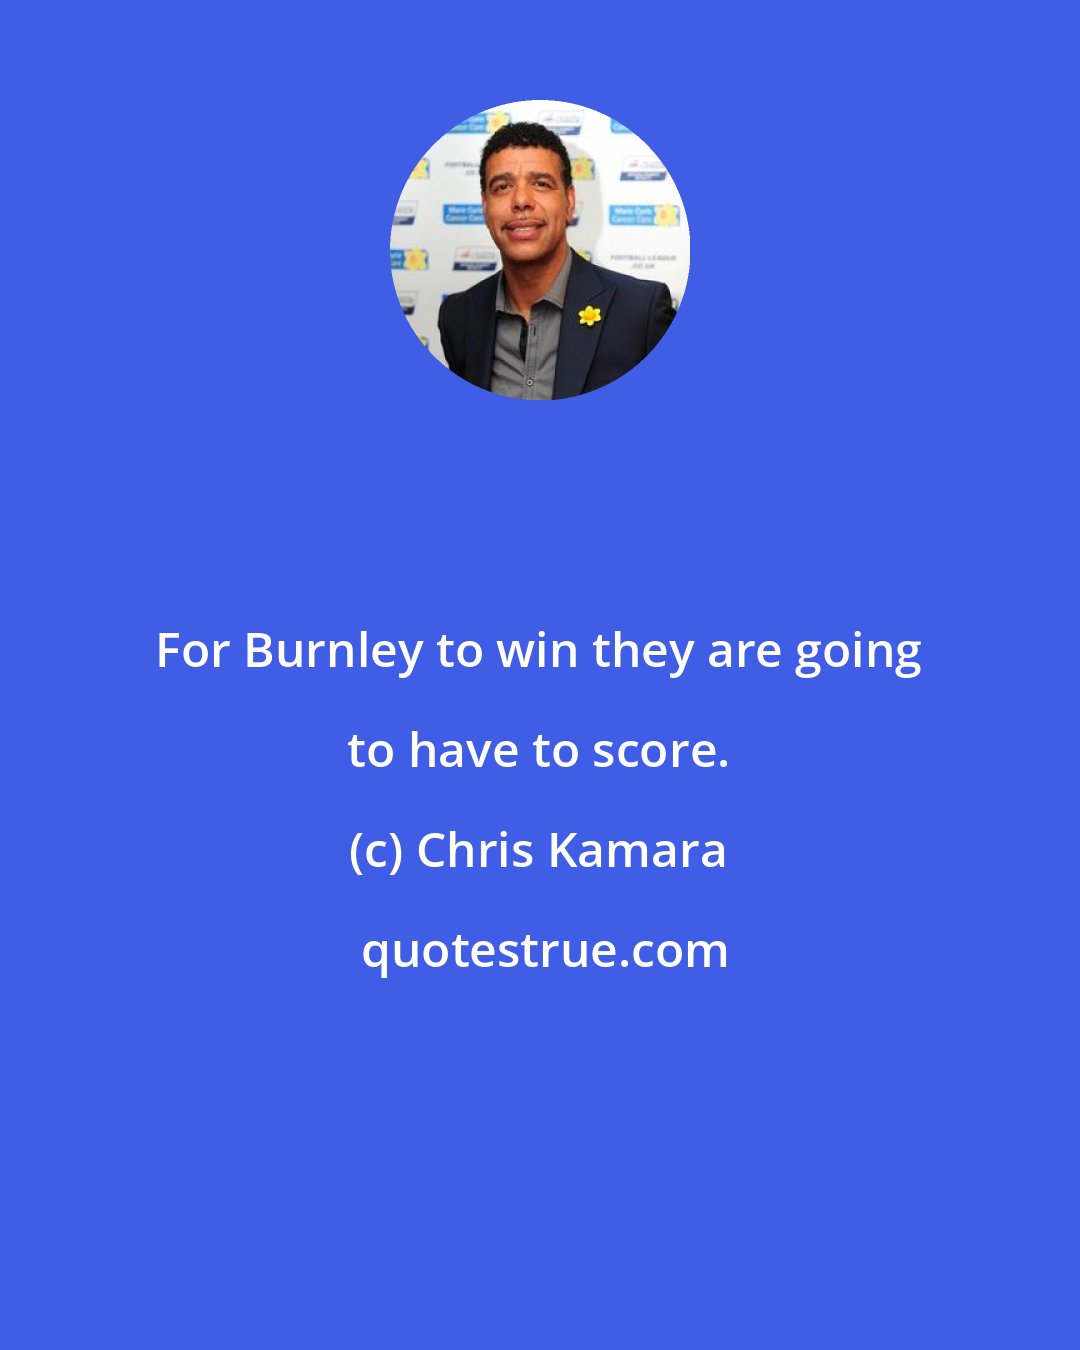 Chris Kamara: For Burnley to win they are going to have to score.